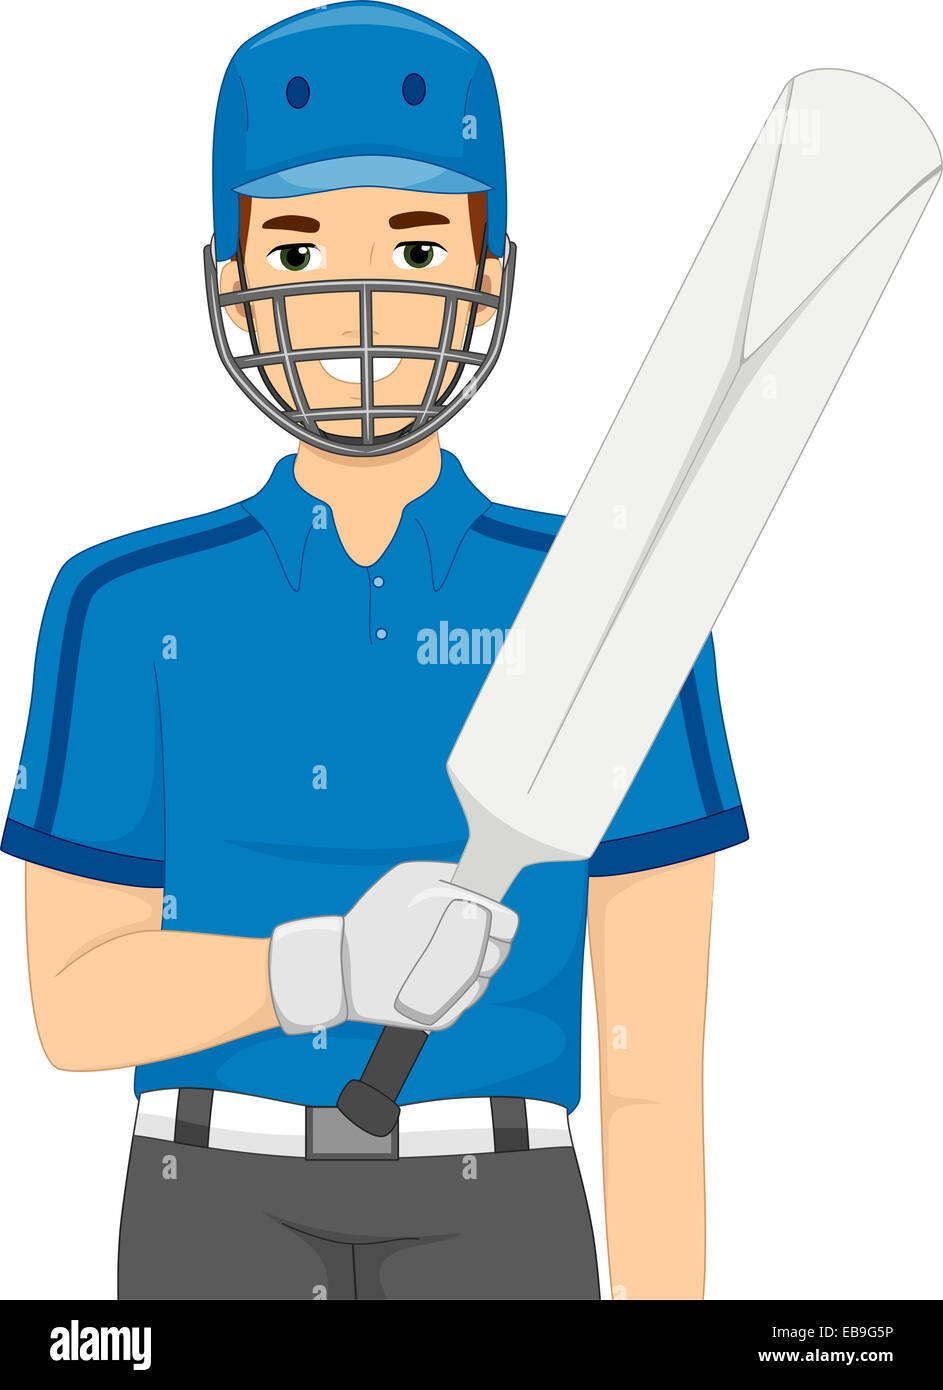 Illustration of a Man Dressed as a Cricket Batter Stock Photo